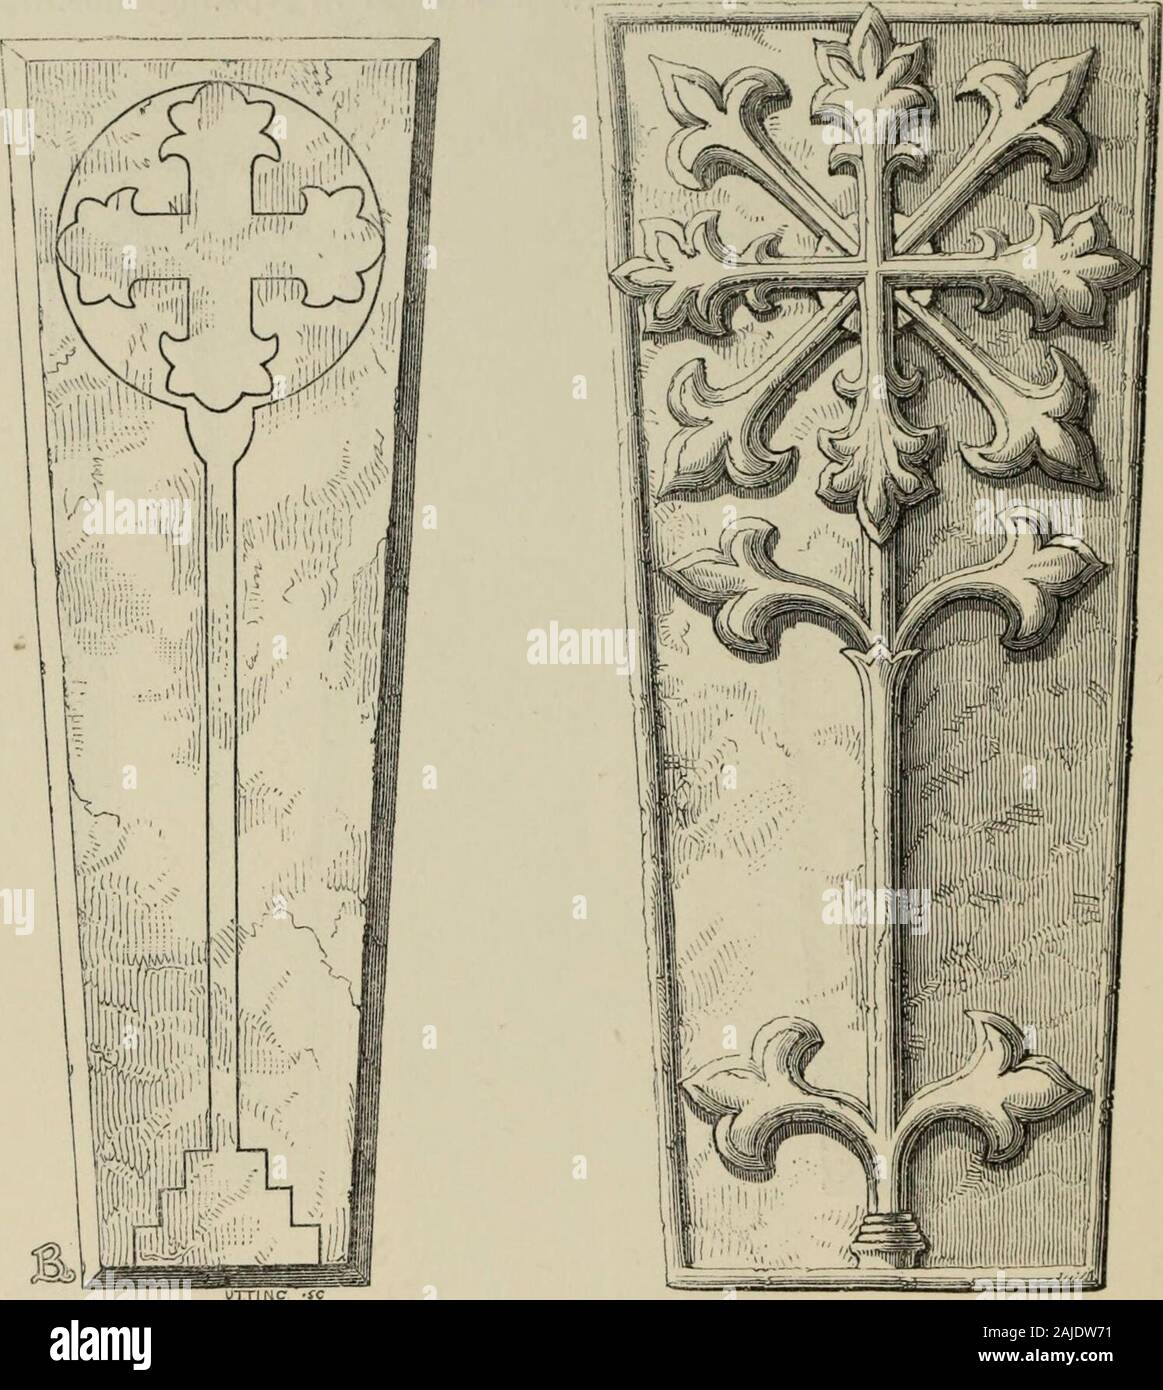 Christian monuments in England and Wales : an historical and descriptive sketch of the various classes of sepulchral monuments which have been in use in this country from about the era of the Norman conquest to the time of Edward the Fourth . XlVth Century. XlVth Century. Stone Coffin-lid, Brandon, Suffolk. Stone Coffin lid. Dorchester Abbey, Ottou. and Rhuddlan in Denbighshire.1 The coffin-lid at Laughten-en-le-Morthen requires no comments upon the graceful richness ofits sculptured decorations: it will be observed, that with thesketch of the coffin-lid is given a section of the stone coffin Stock Photo